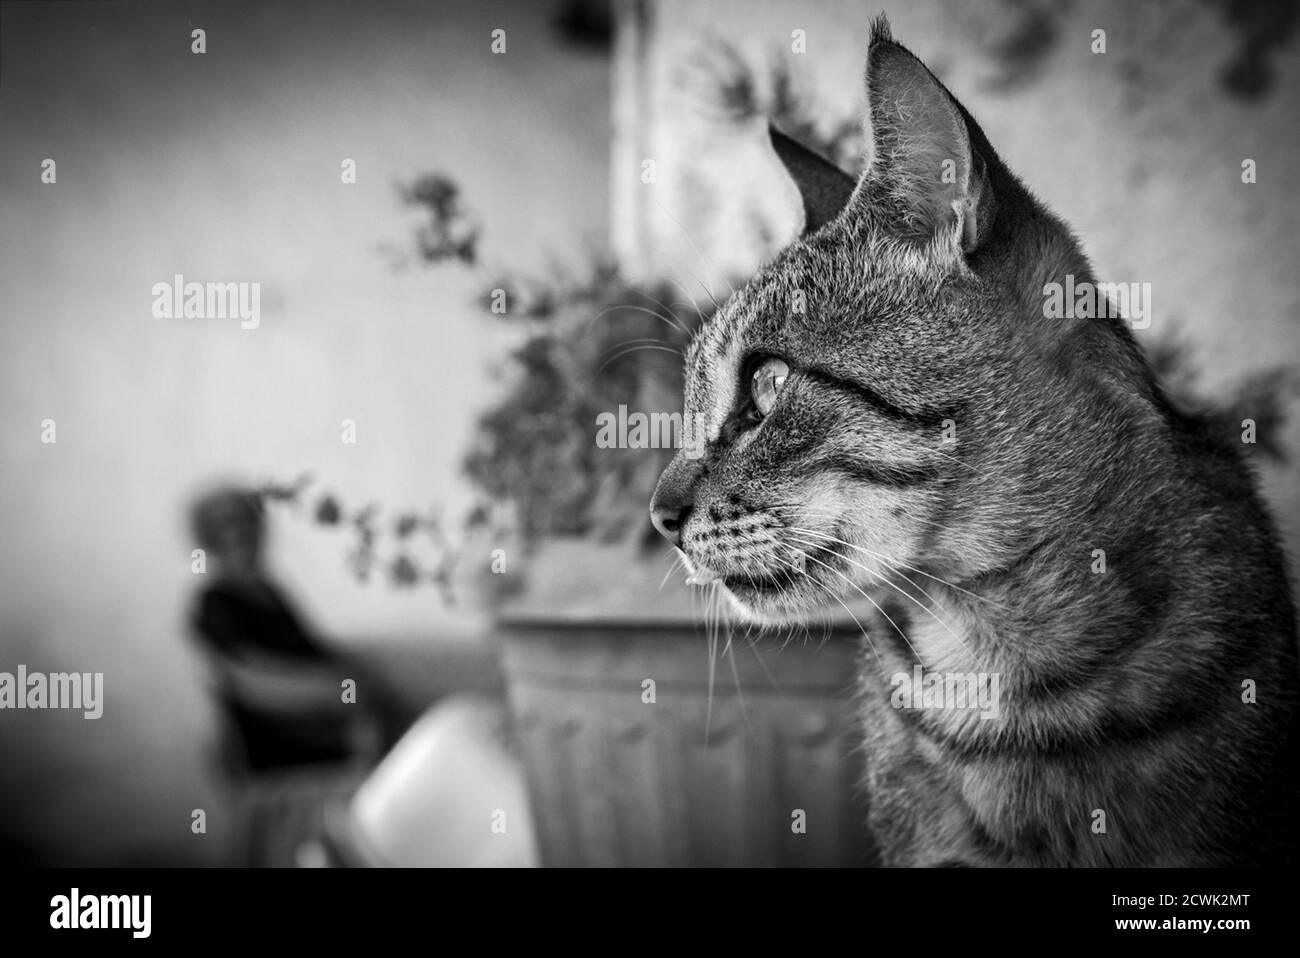 The faithful cat watching over his elderly caregiver Stock Photo